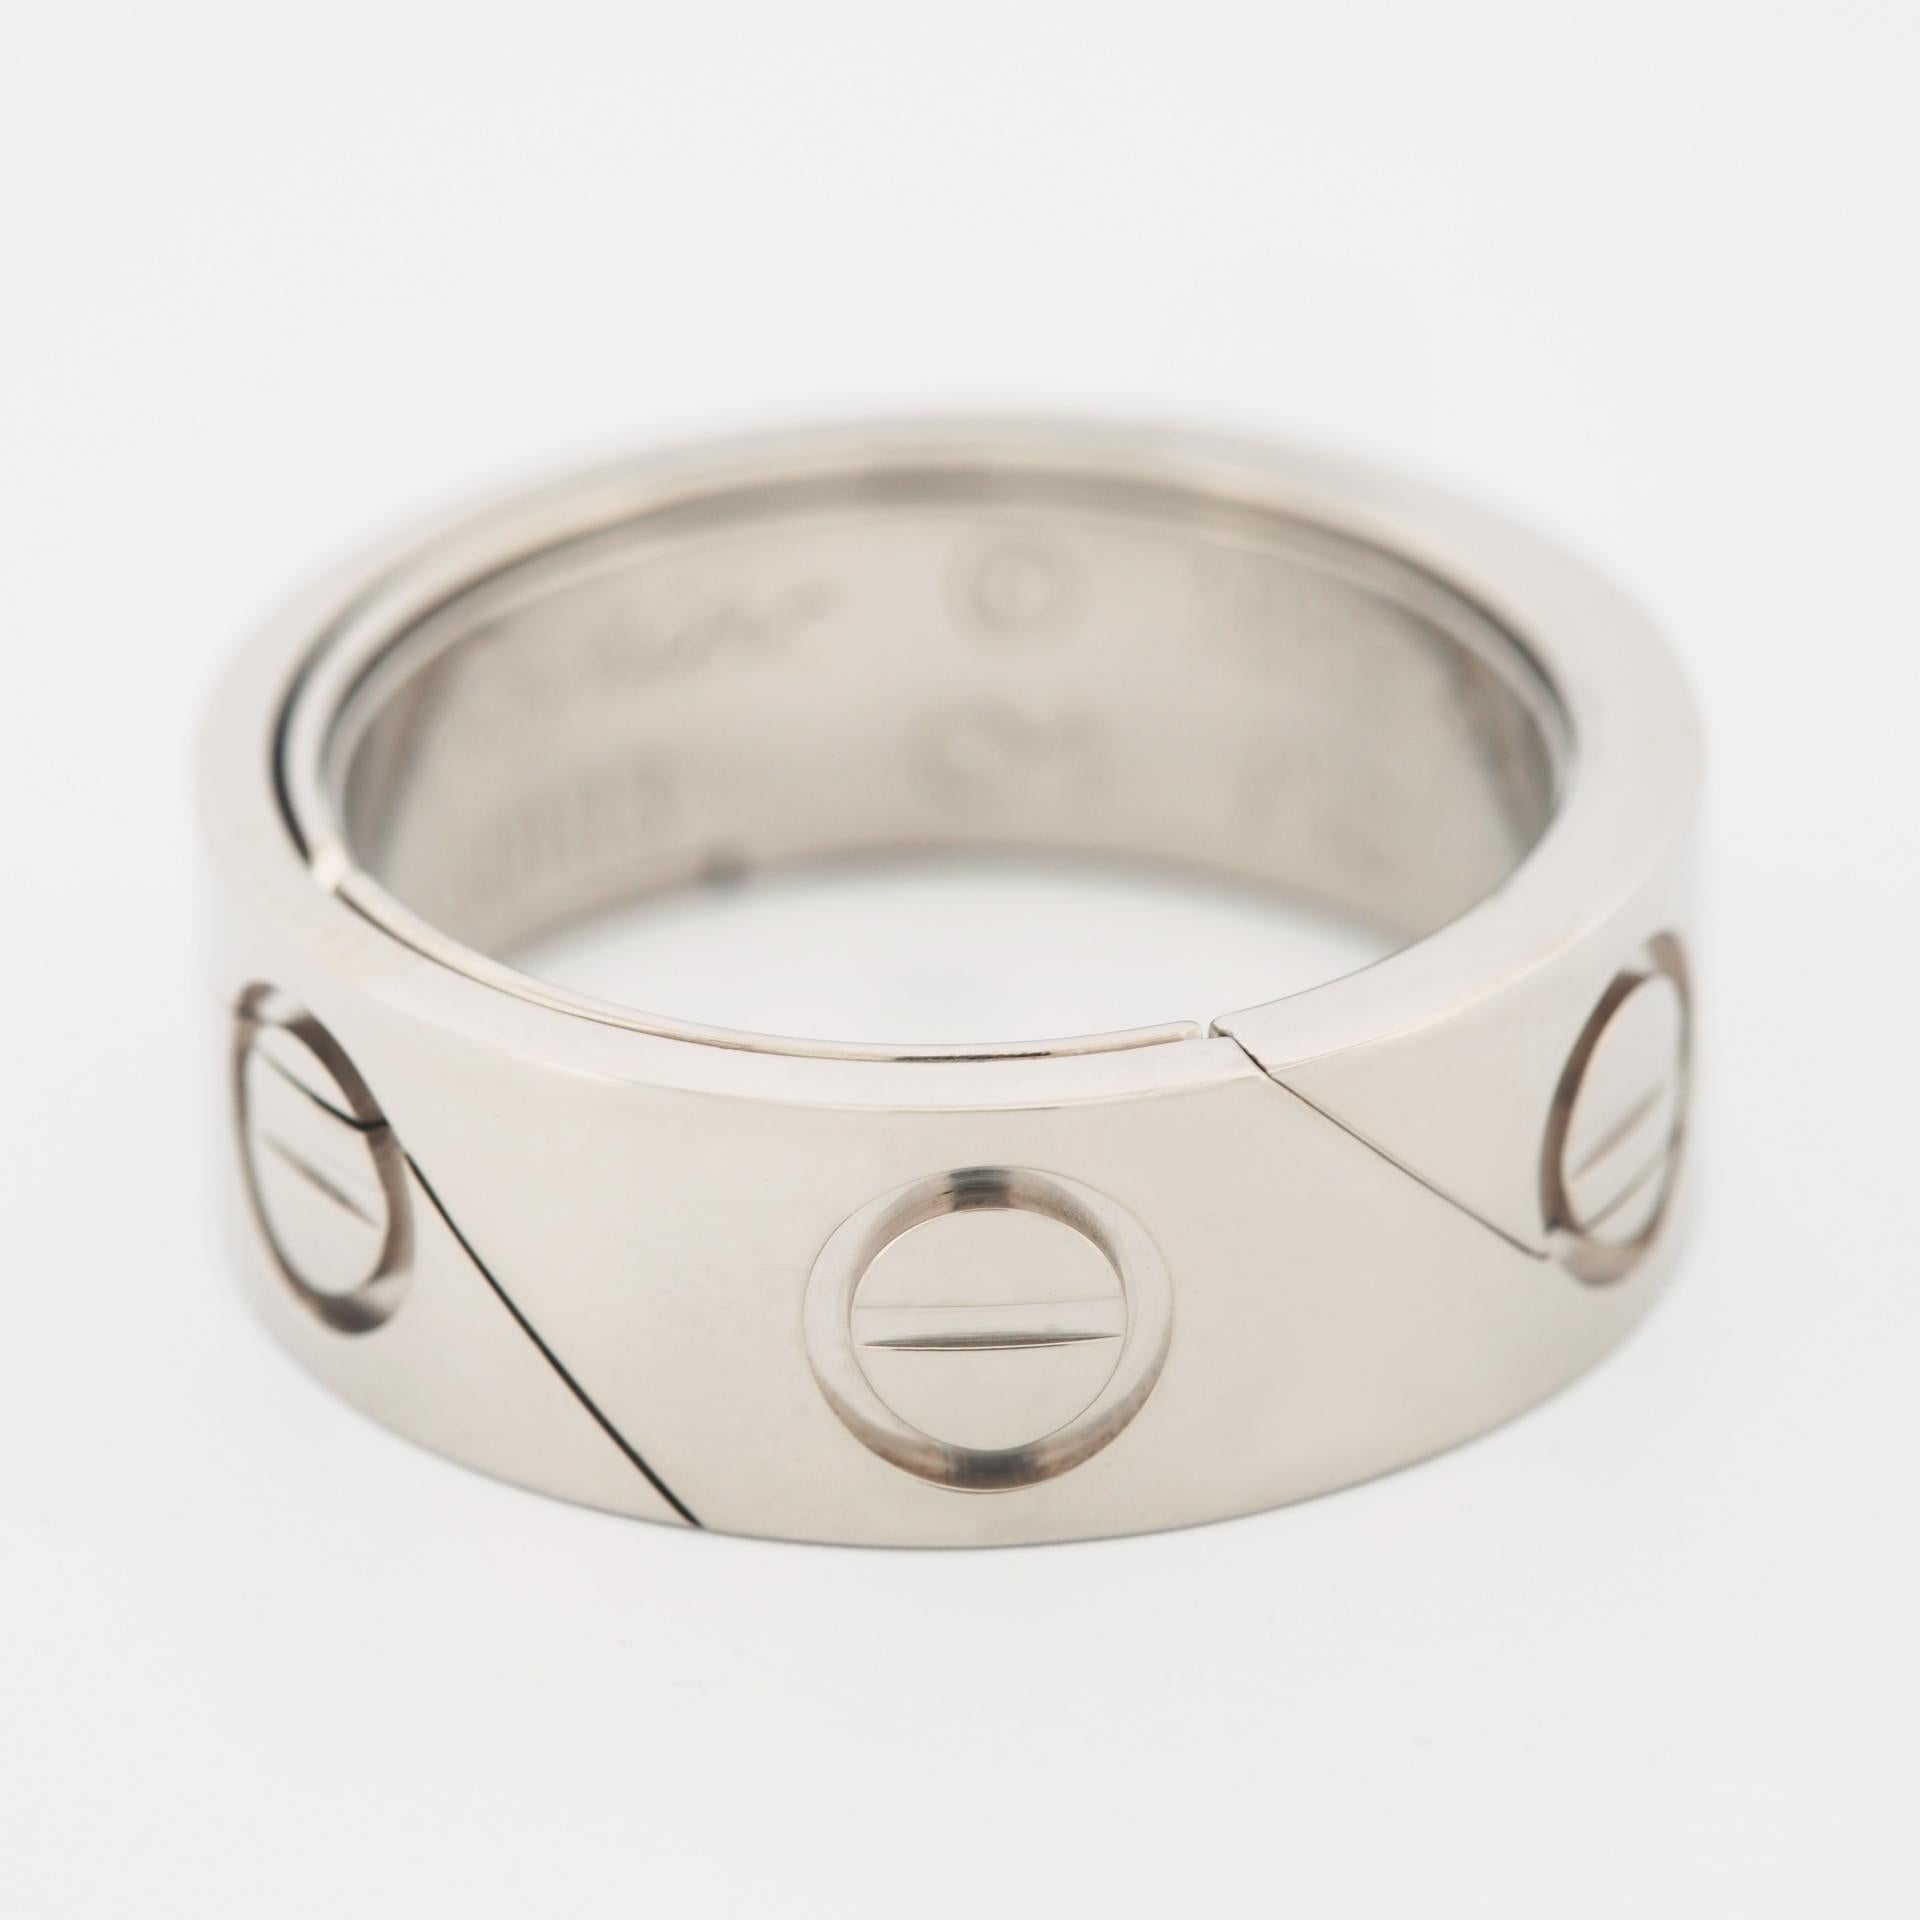 Women's or Men's Cartier Astro Love Ring White Gold 53 US 6.25 1999 Limited Edition For Sale